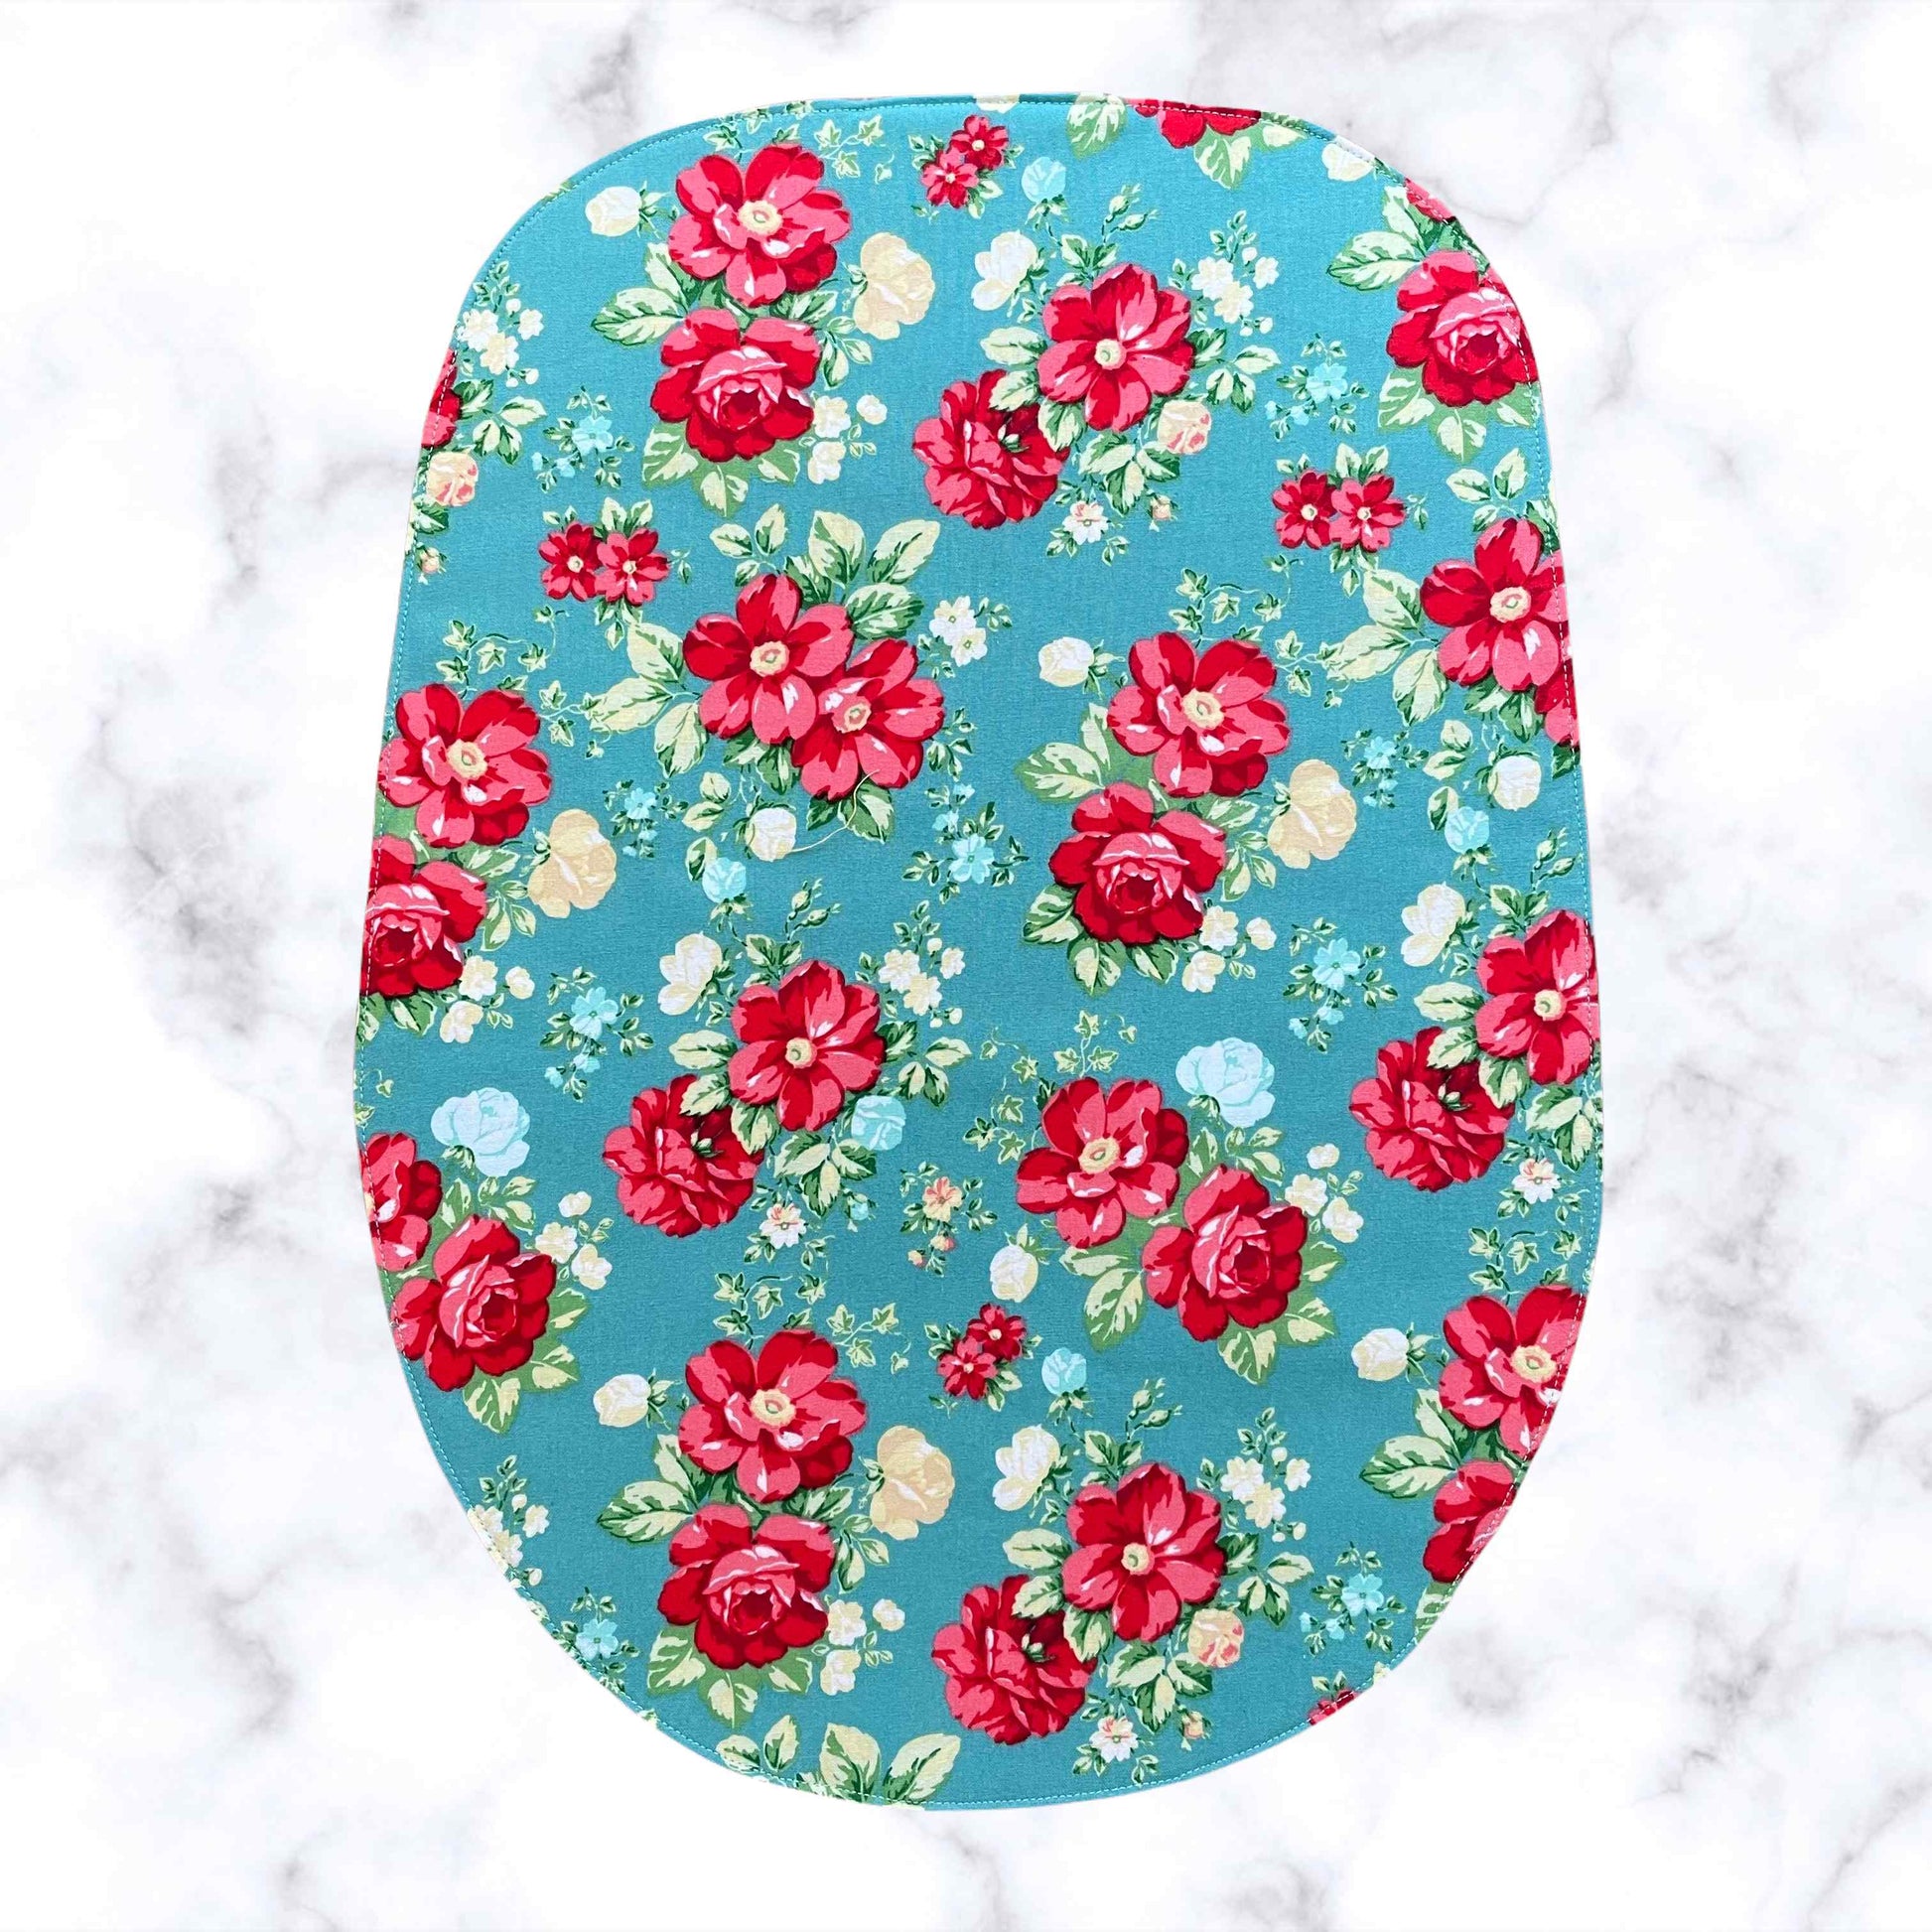 Stand Mixer Bowl Covers | Pioneer Woman Heritage Floral | XL Bowl Cover